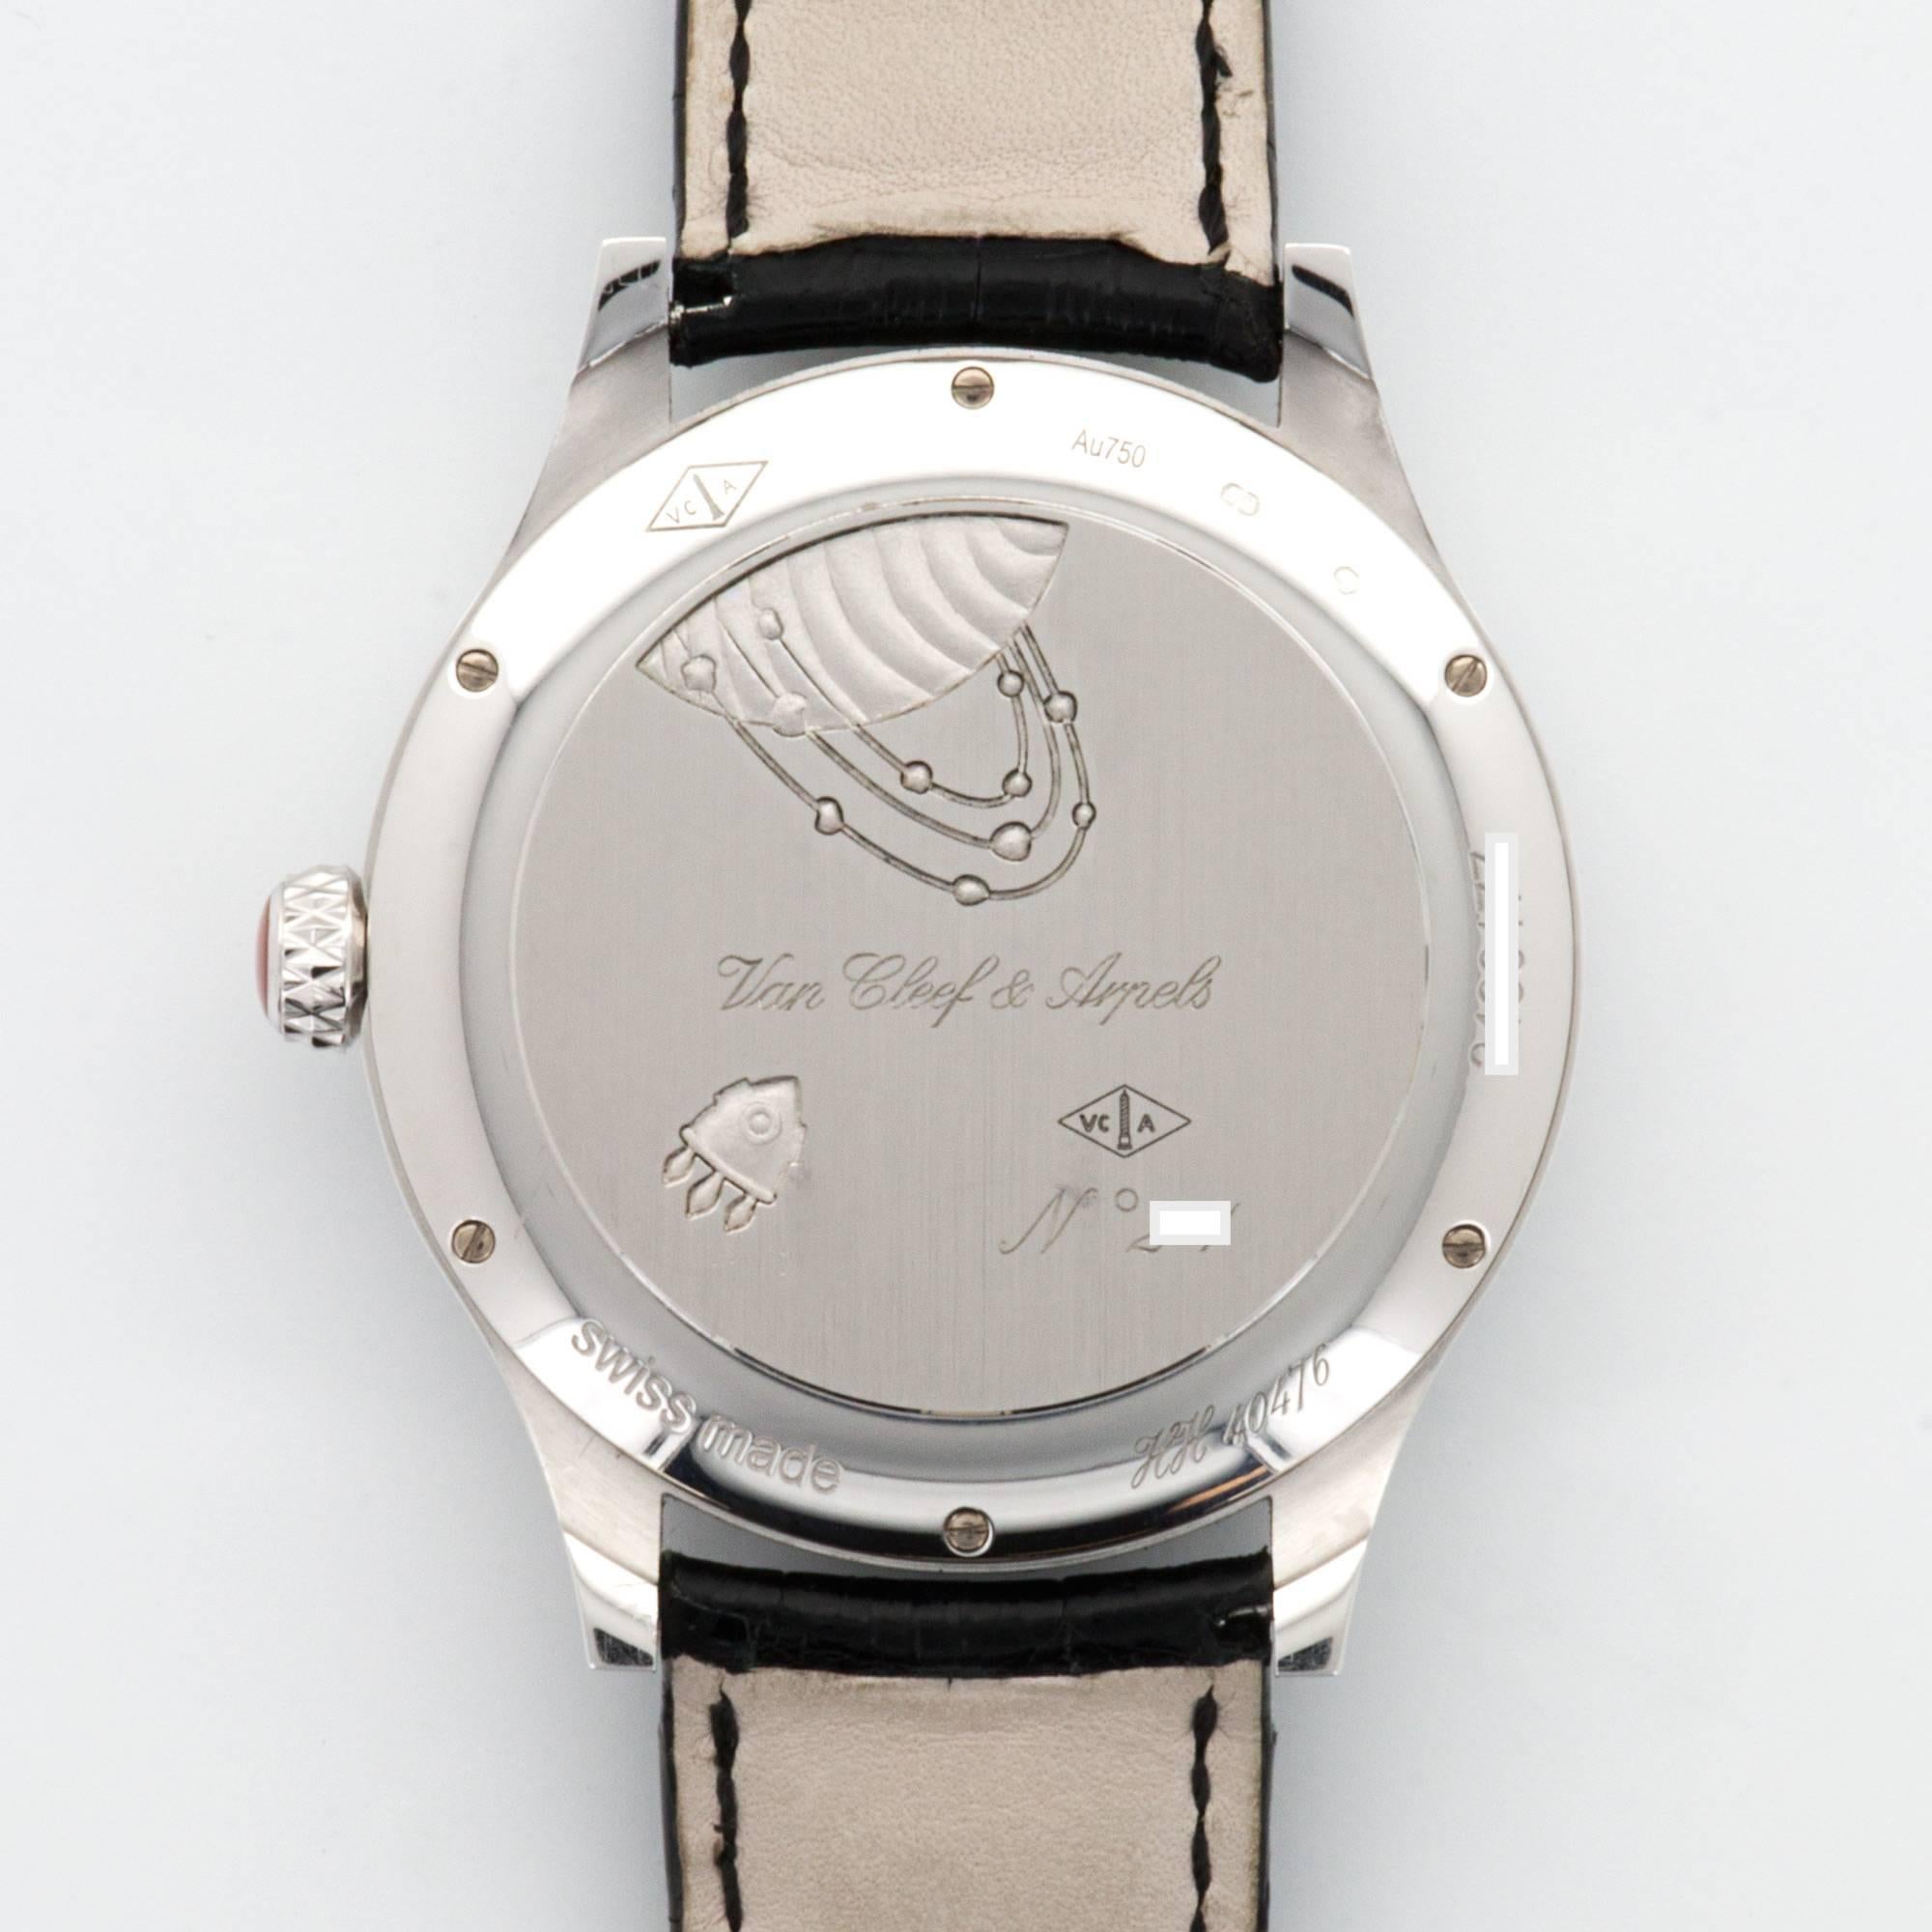 Modern Van Cleef & Arpels White Gold Diamond From The Earth to the Moon Wristwatch